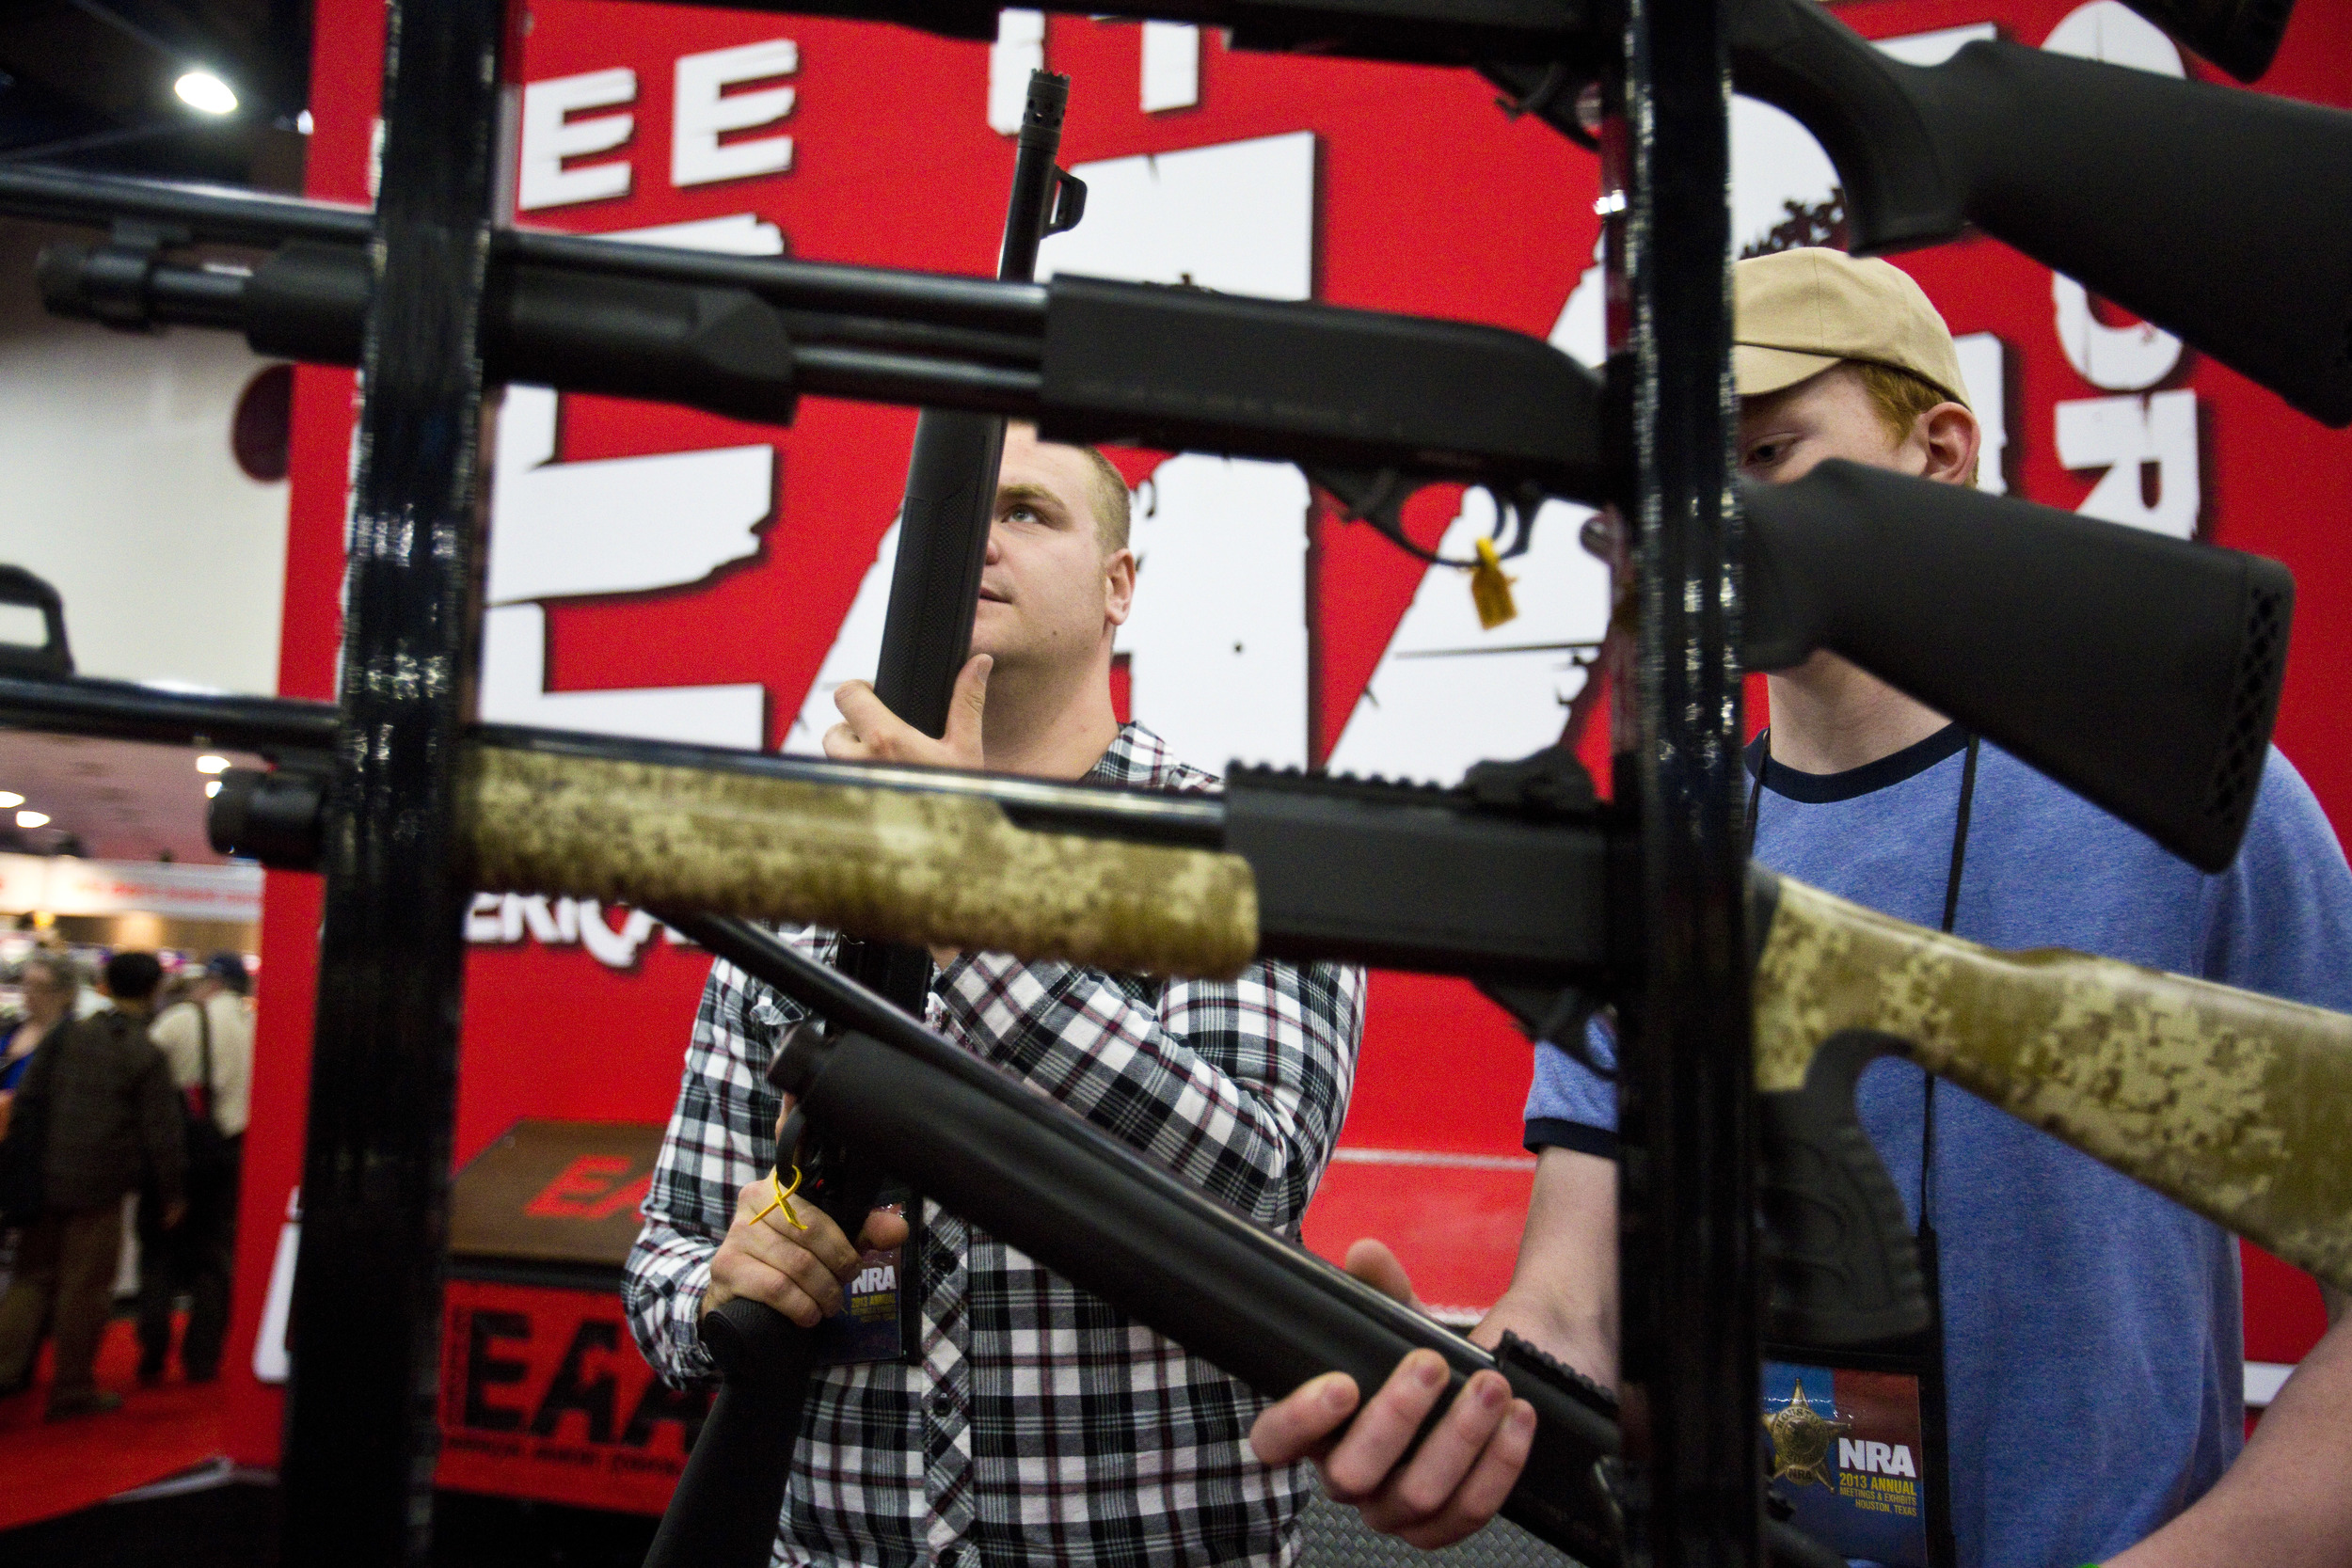  David Goodrum, left, and brother Matt, look at SAR semi automatic home defense 12 gauge shotguns at the 2013 National Rifle Association Meeting and Exhibits May 4, 2013 in Houston. 